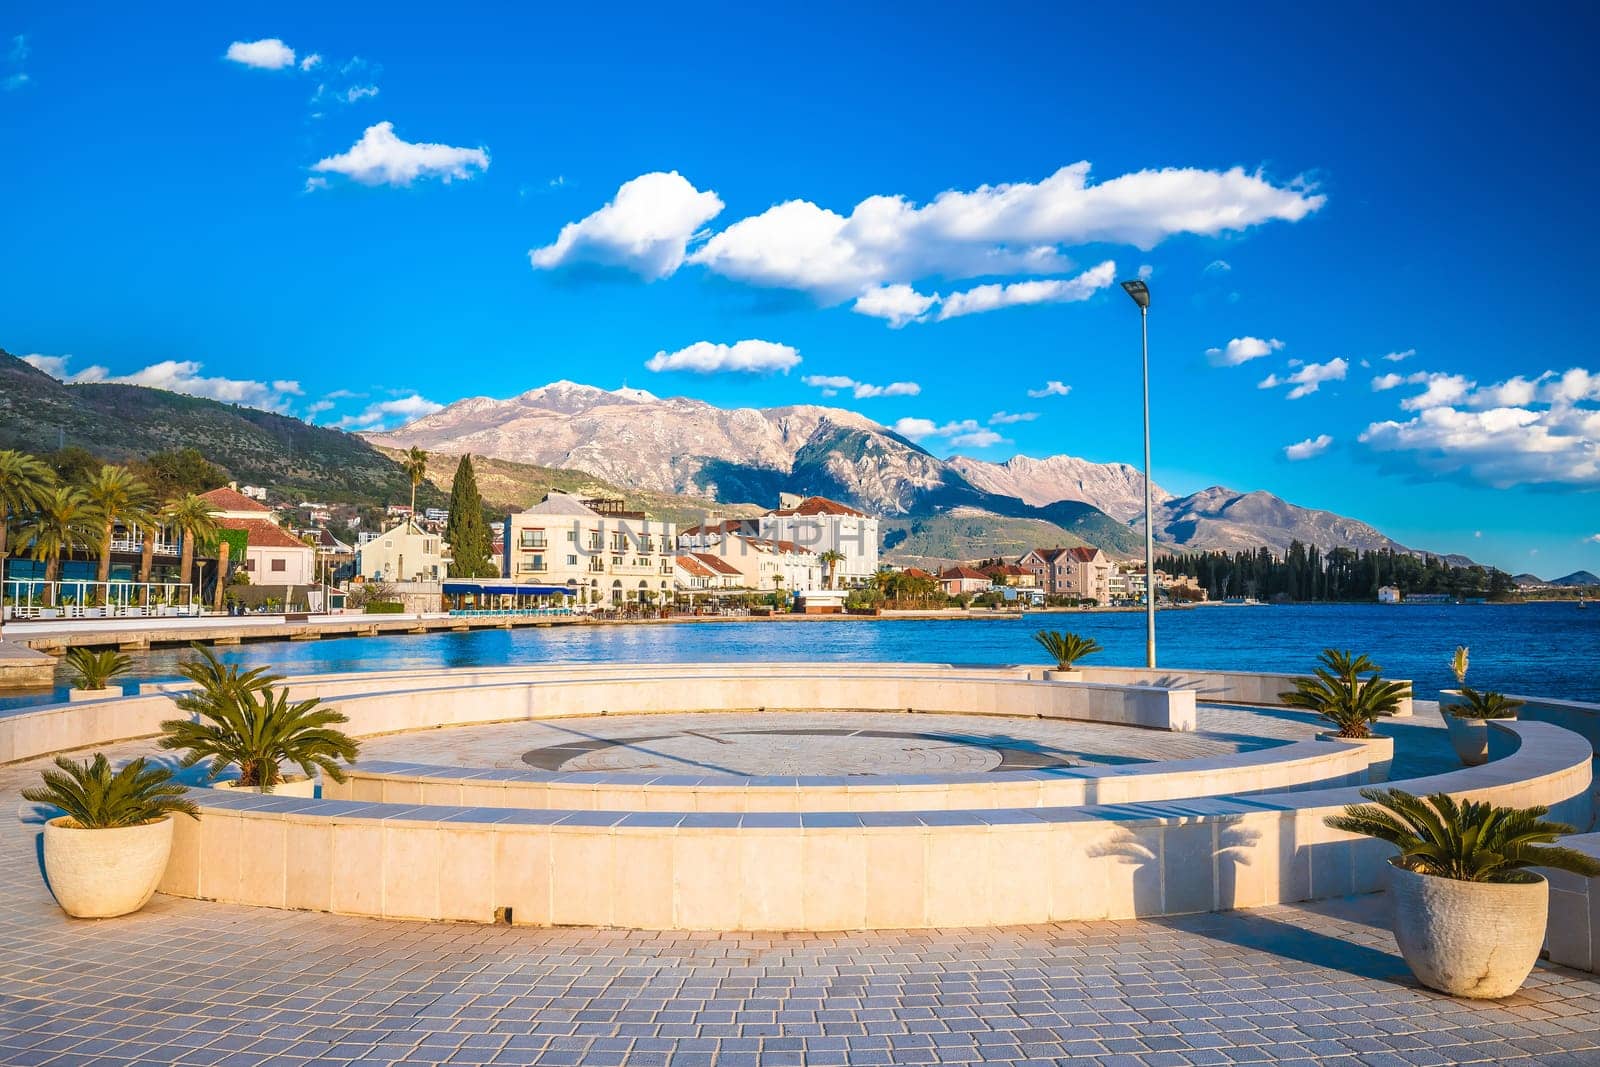 Town of Tivat scenic destination waterfront view by xbrchx